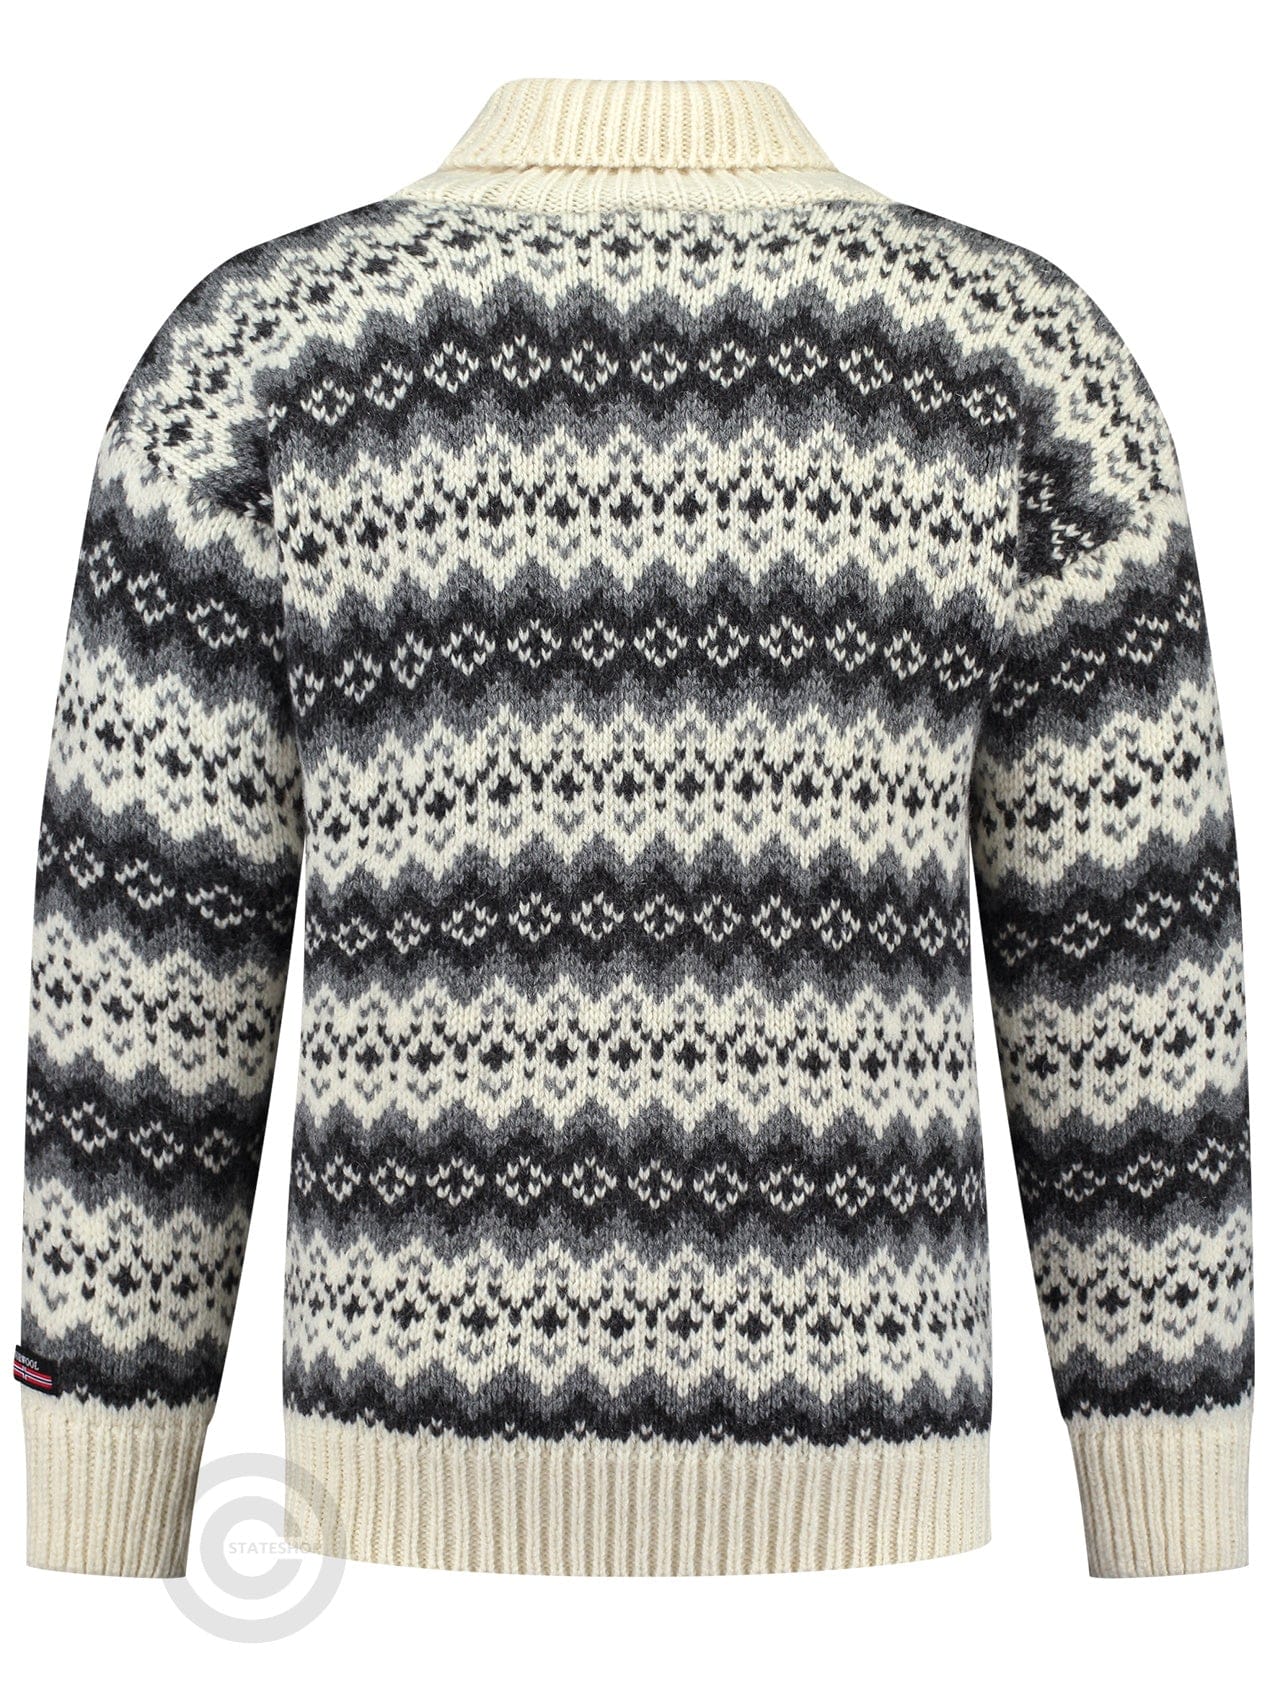 NorfindeIcelandic sweater with roll neck of 100% pure new woolStatesho -  Stateshop Fashion